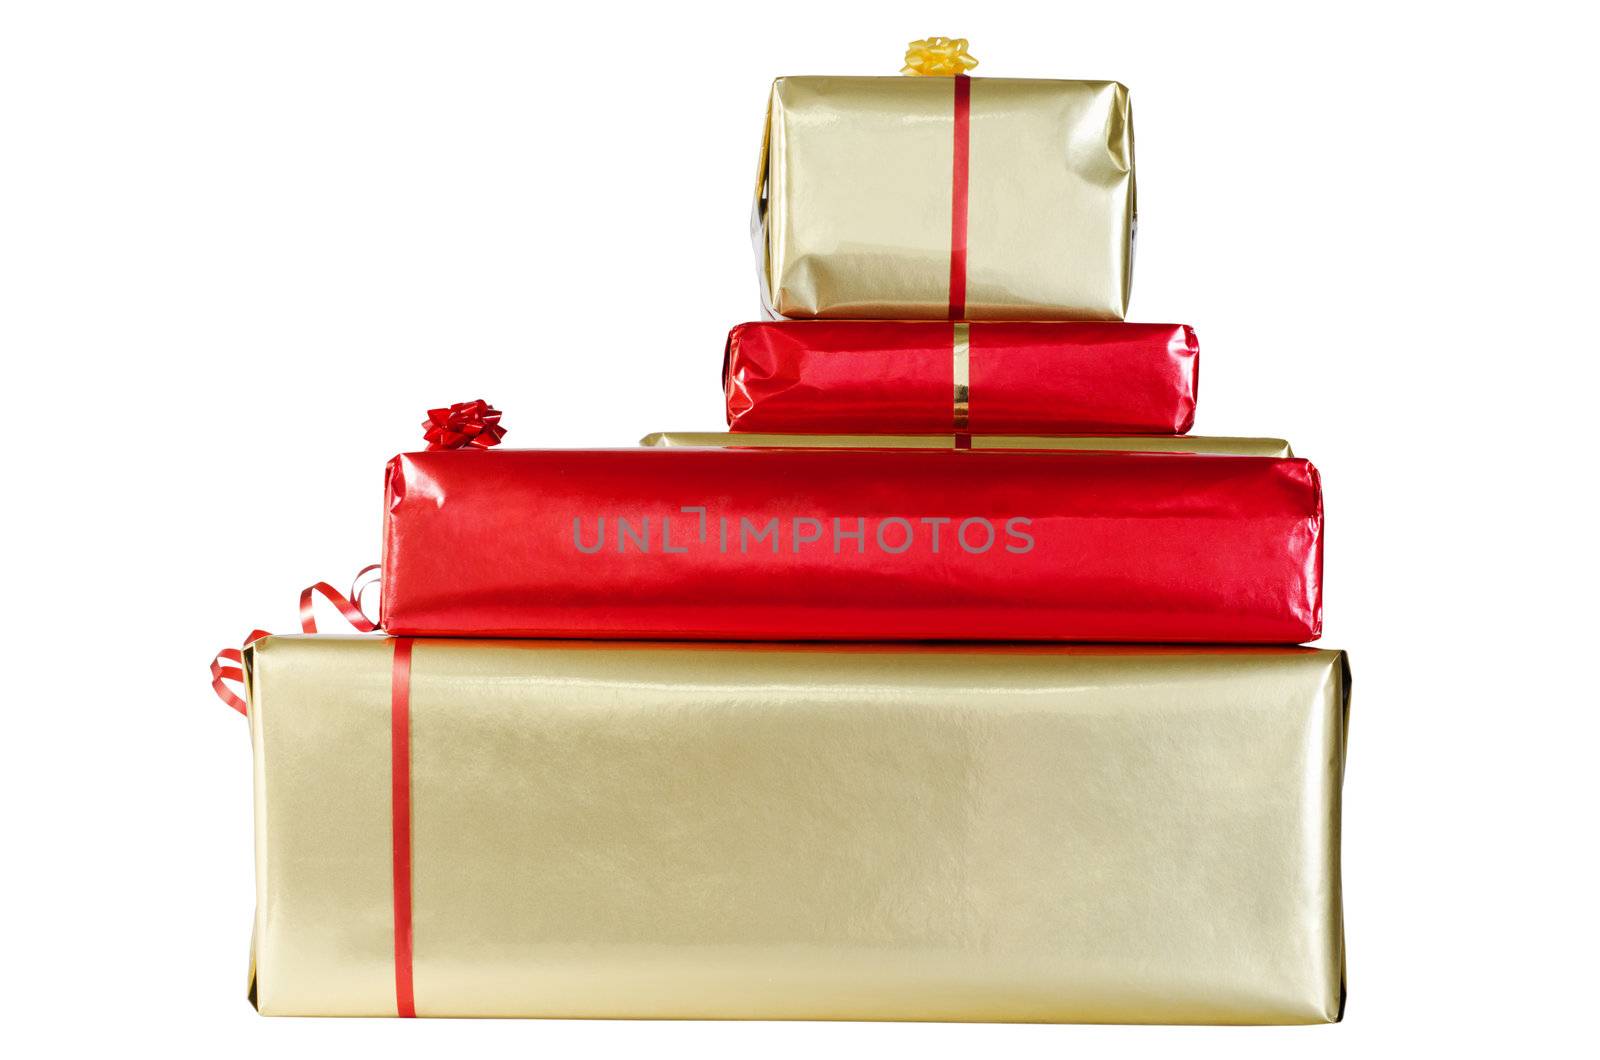 A pile of Christmas gift boxes, wrapped in red and gold paper and decorated with ribbon and rosettes, isolated on a white background.